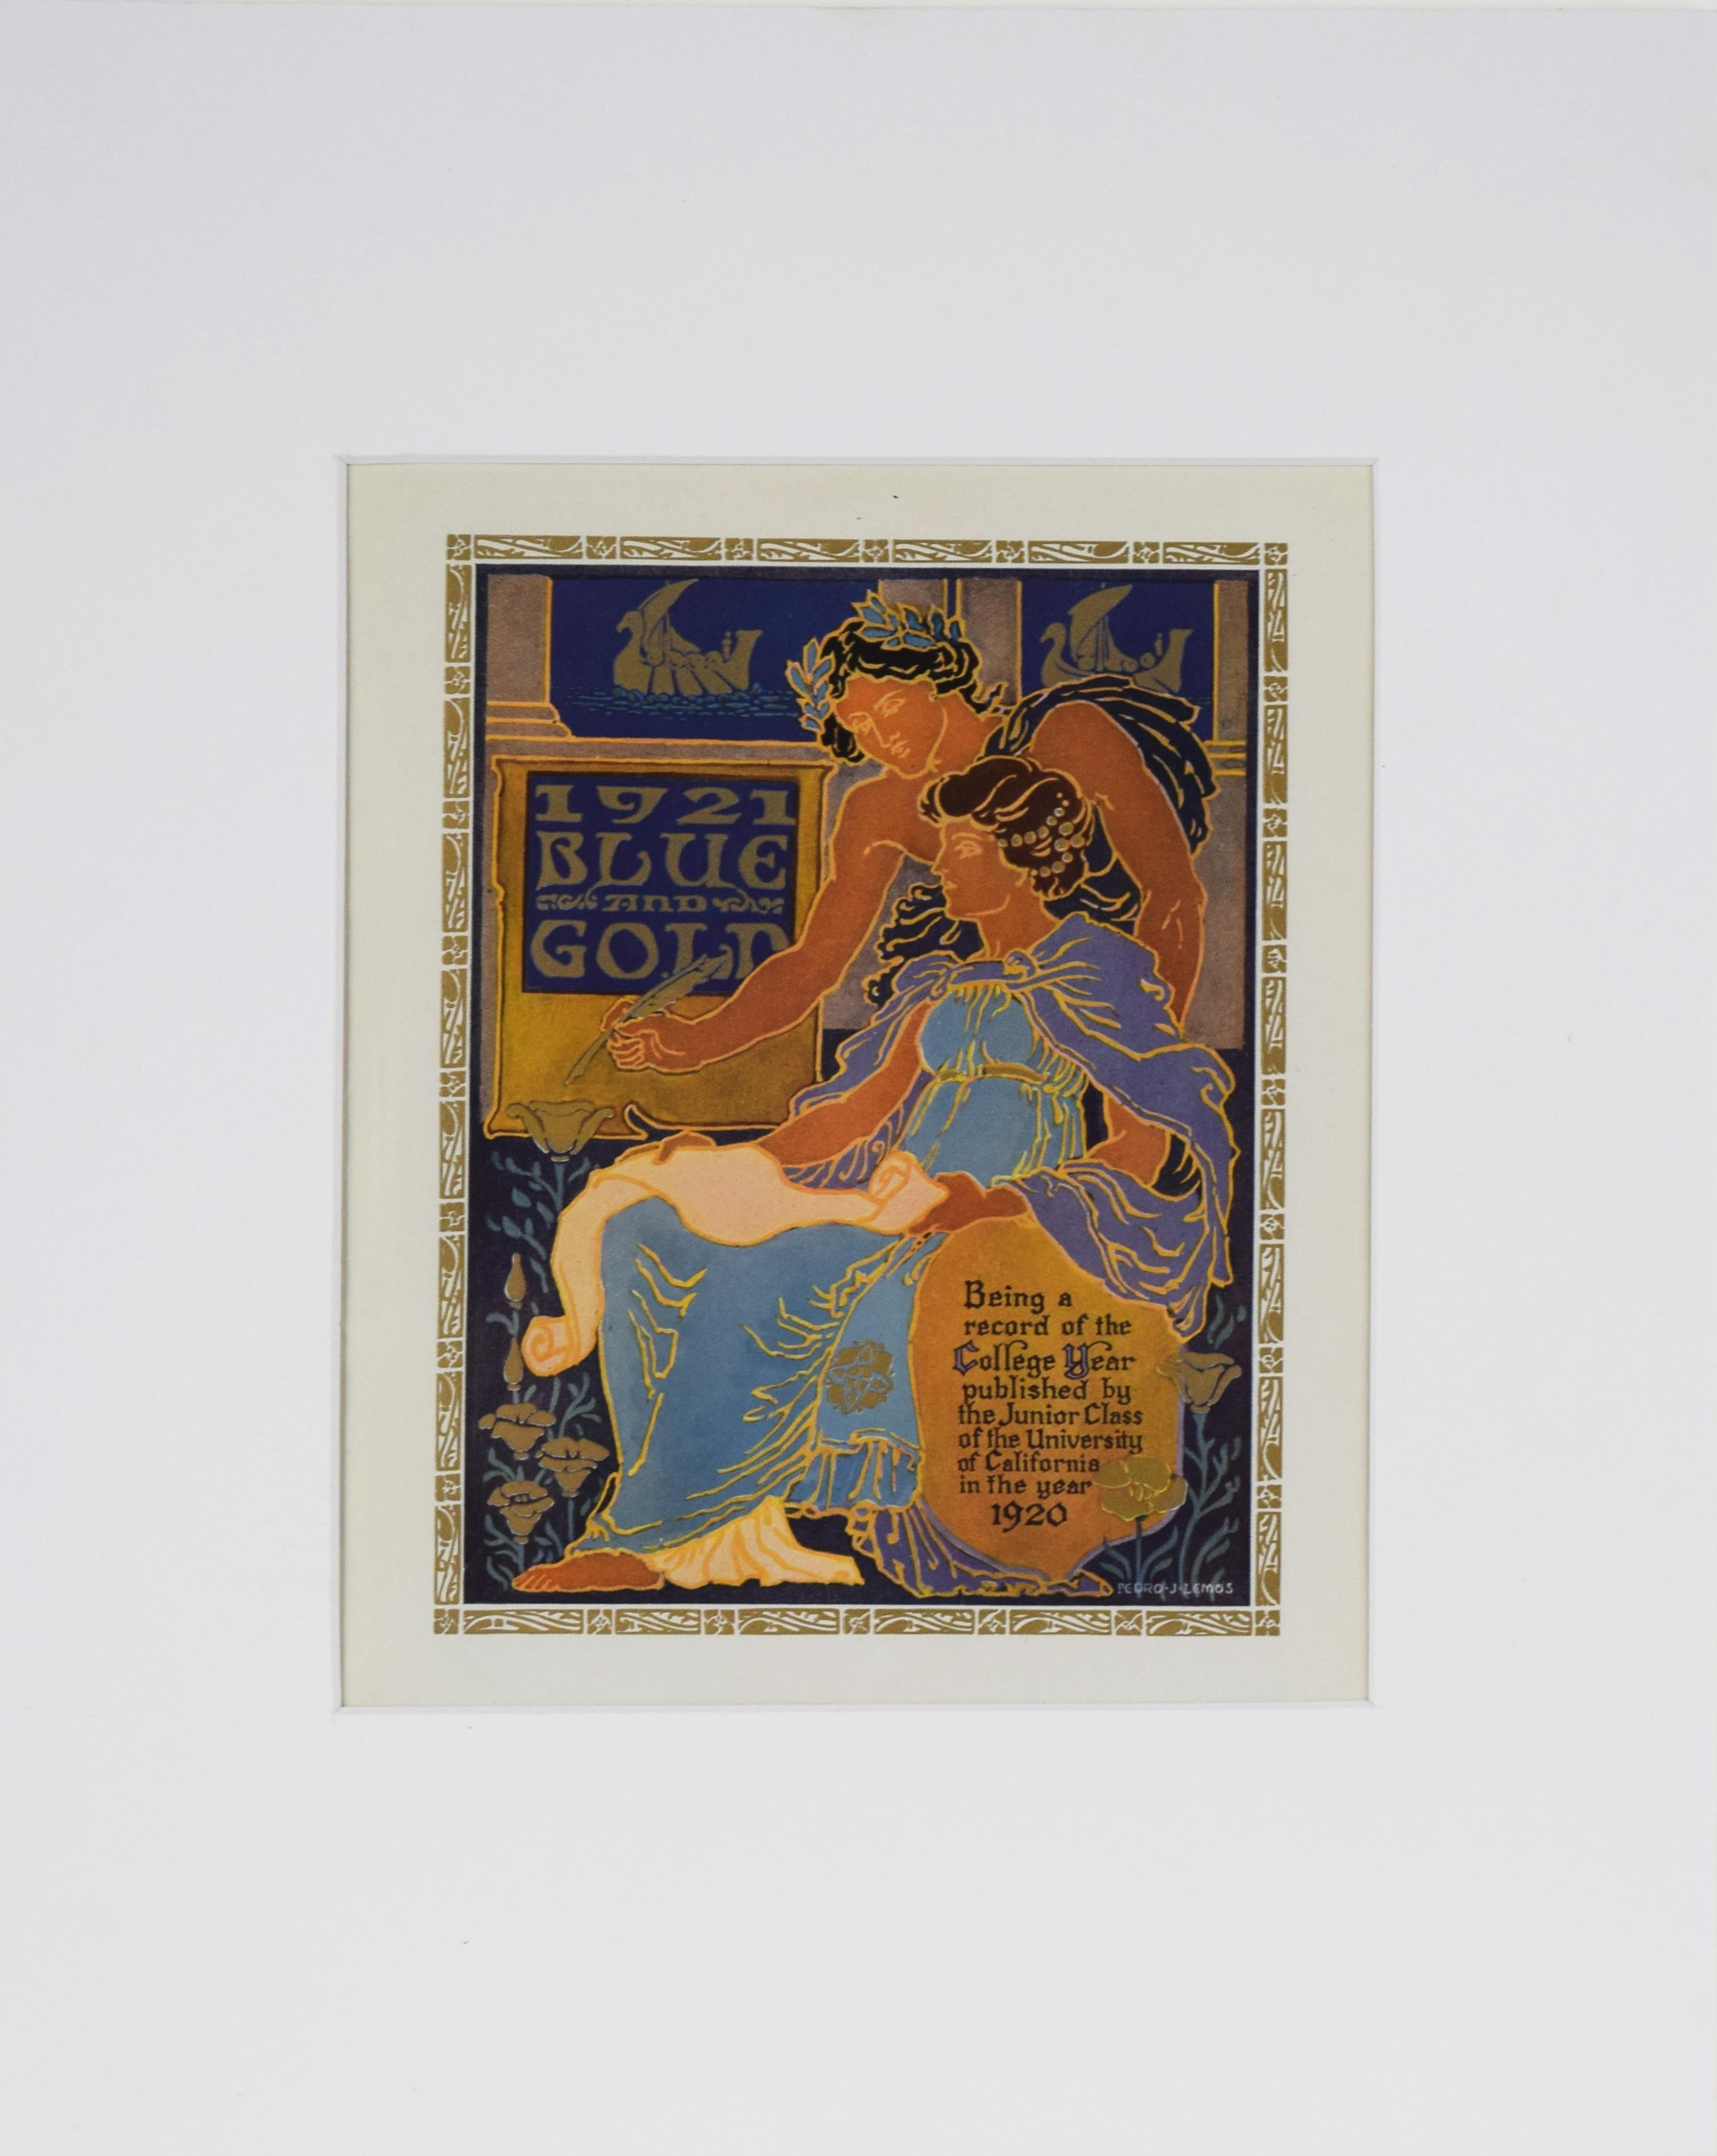 Pedro Lemos Figurative Print - "1921 Blue And Gold" - UC Berkeley Yearbook Color Lithograph